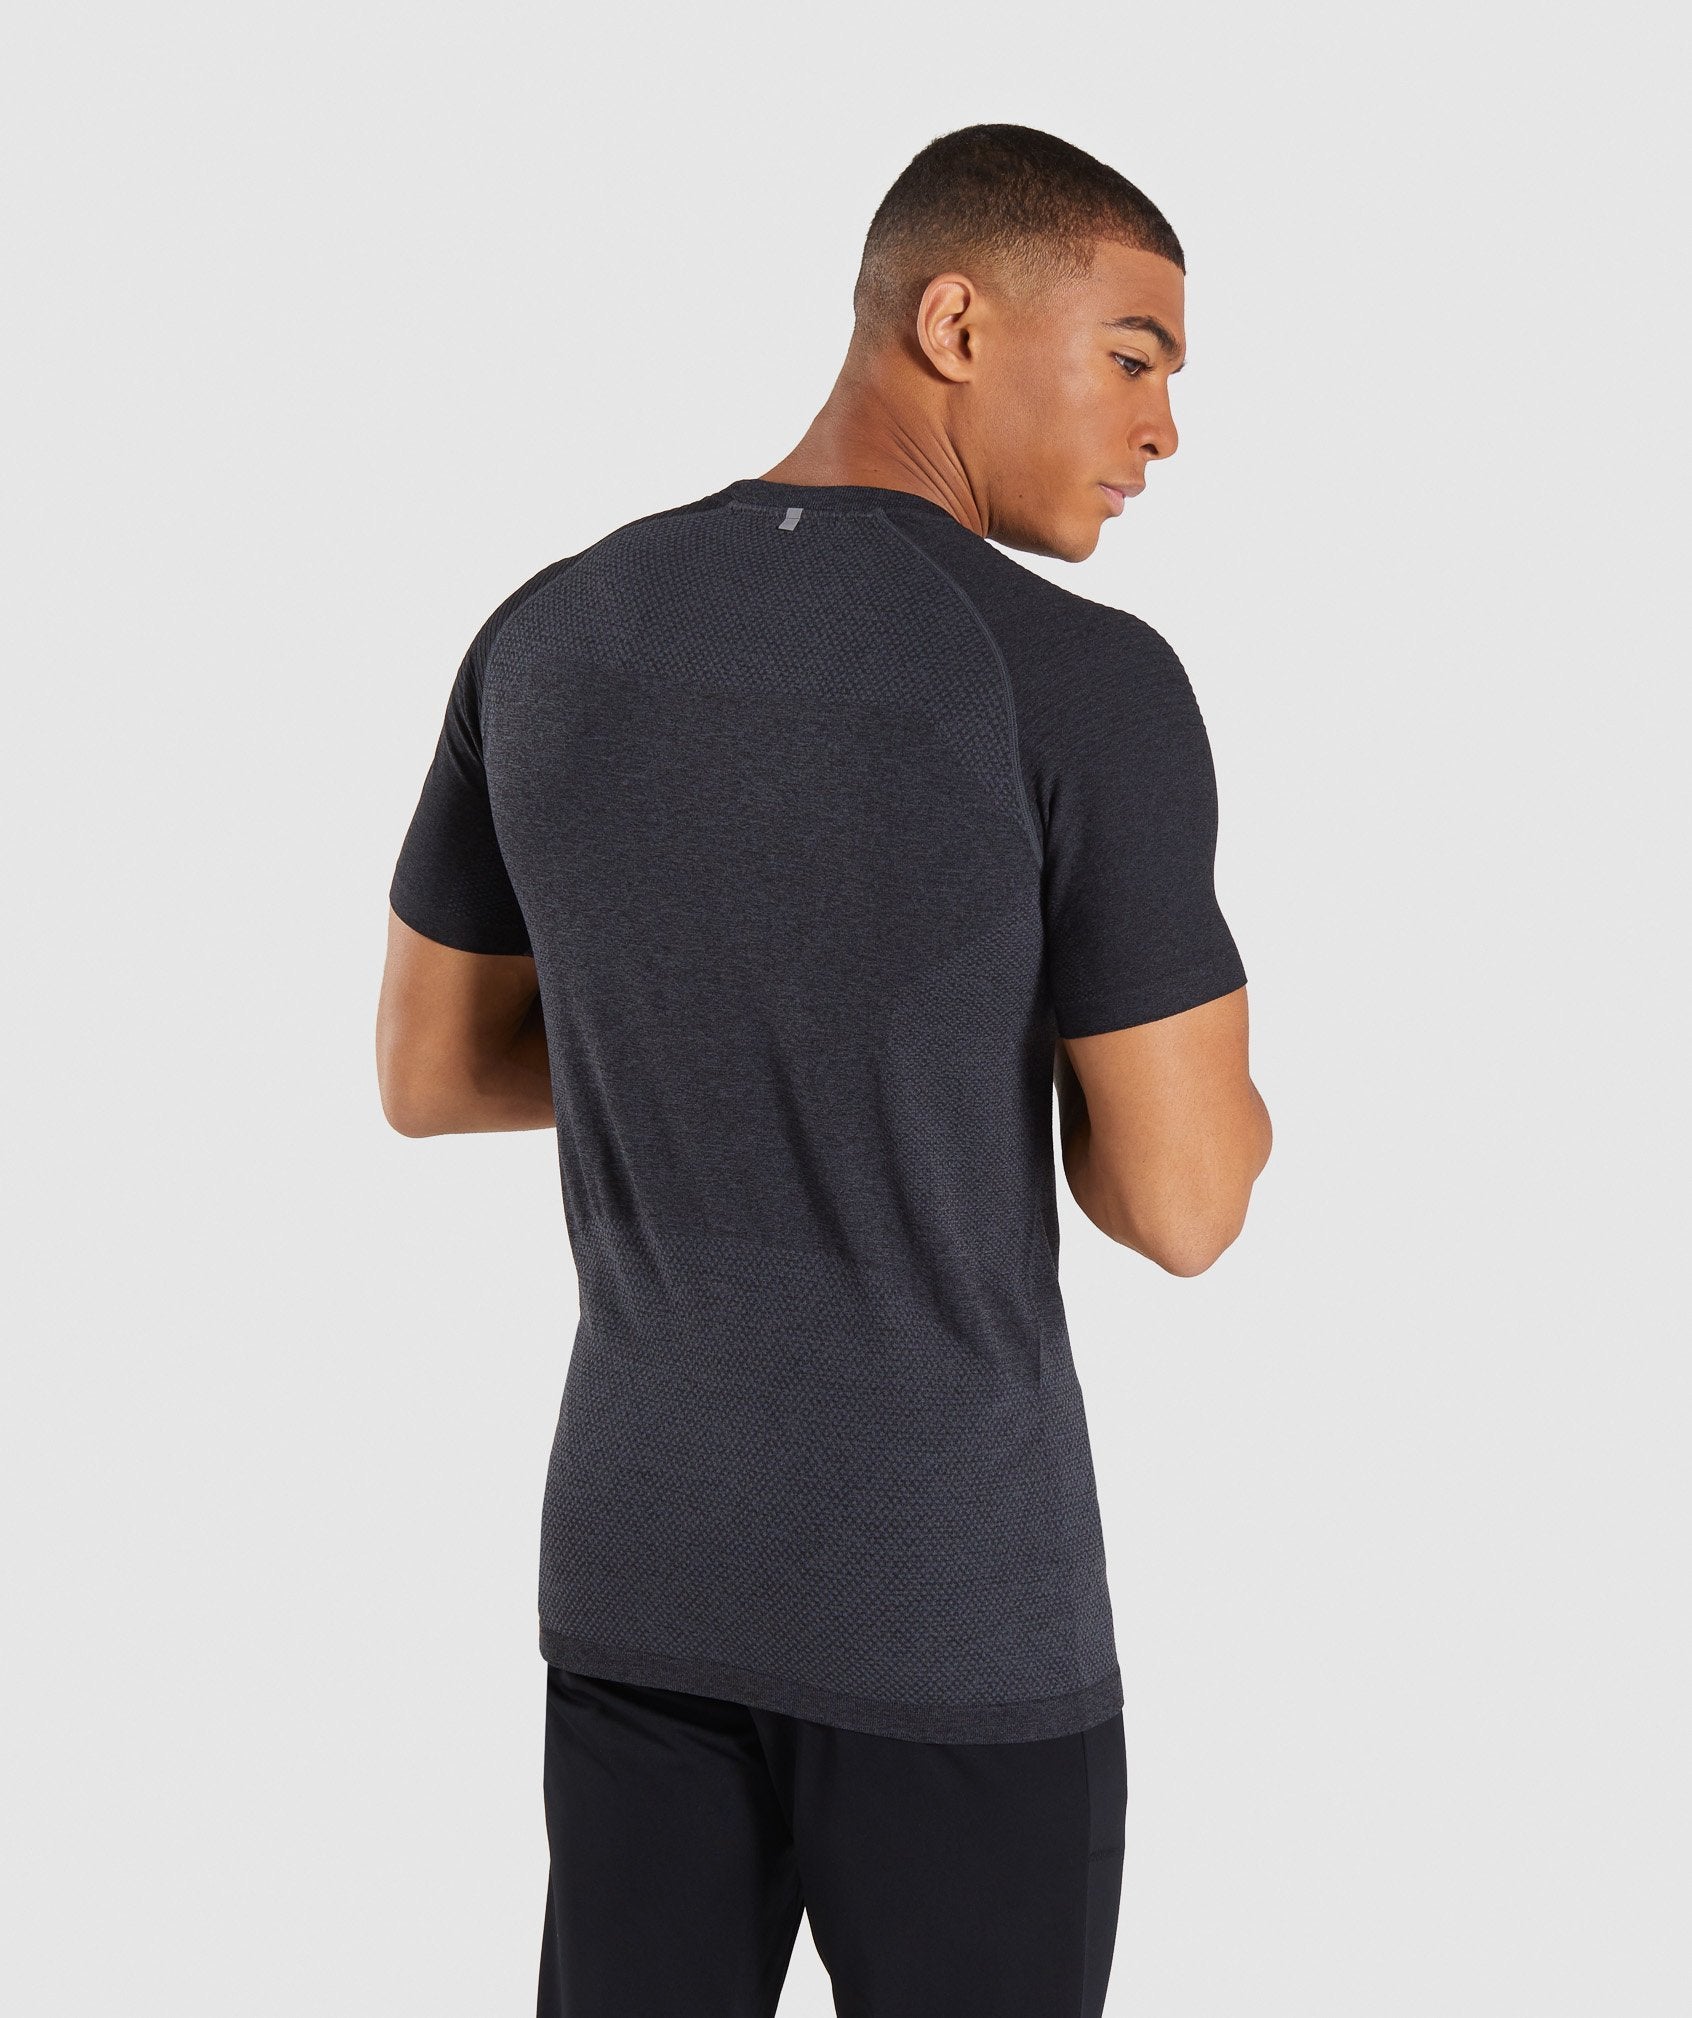 Premium Seamless T-Shirt in Charcoal Marl - view 2